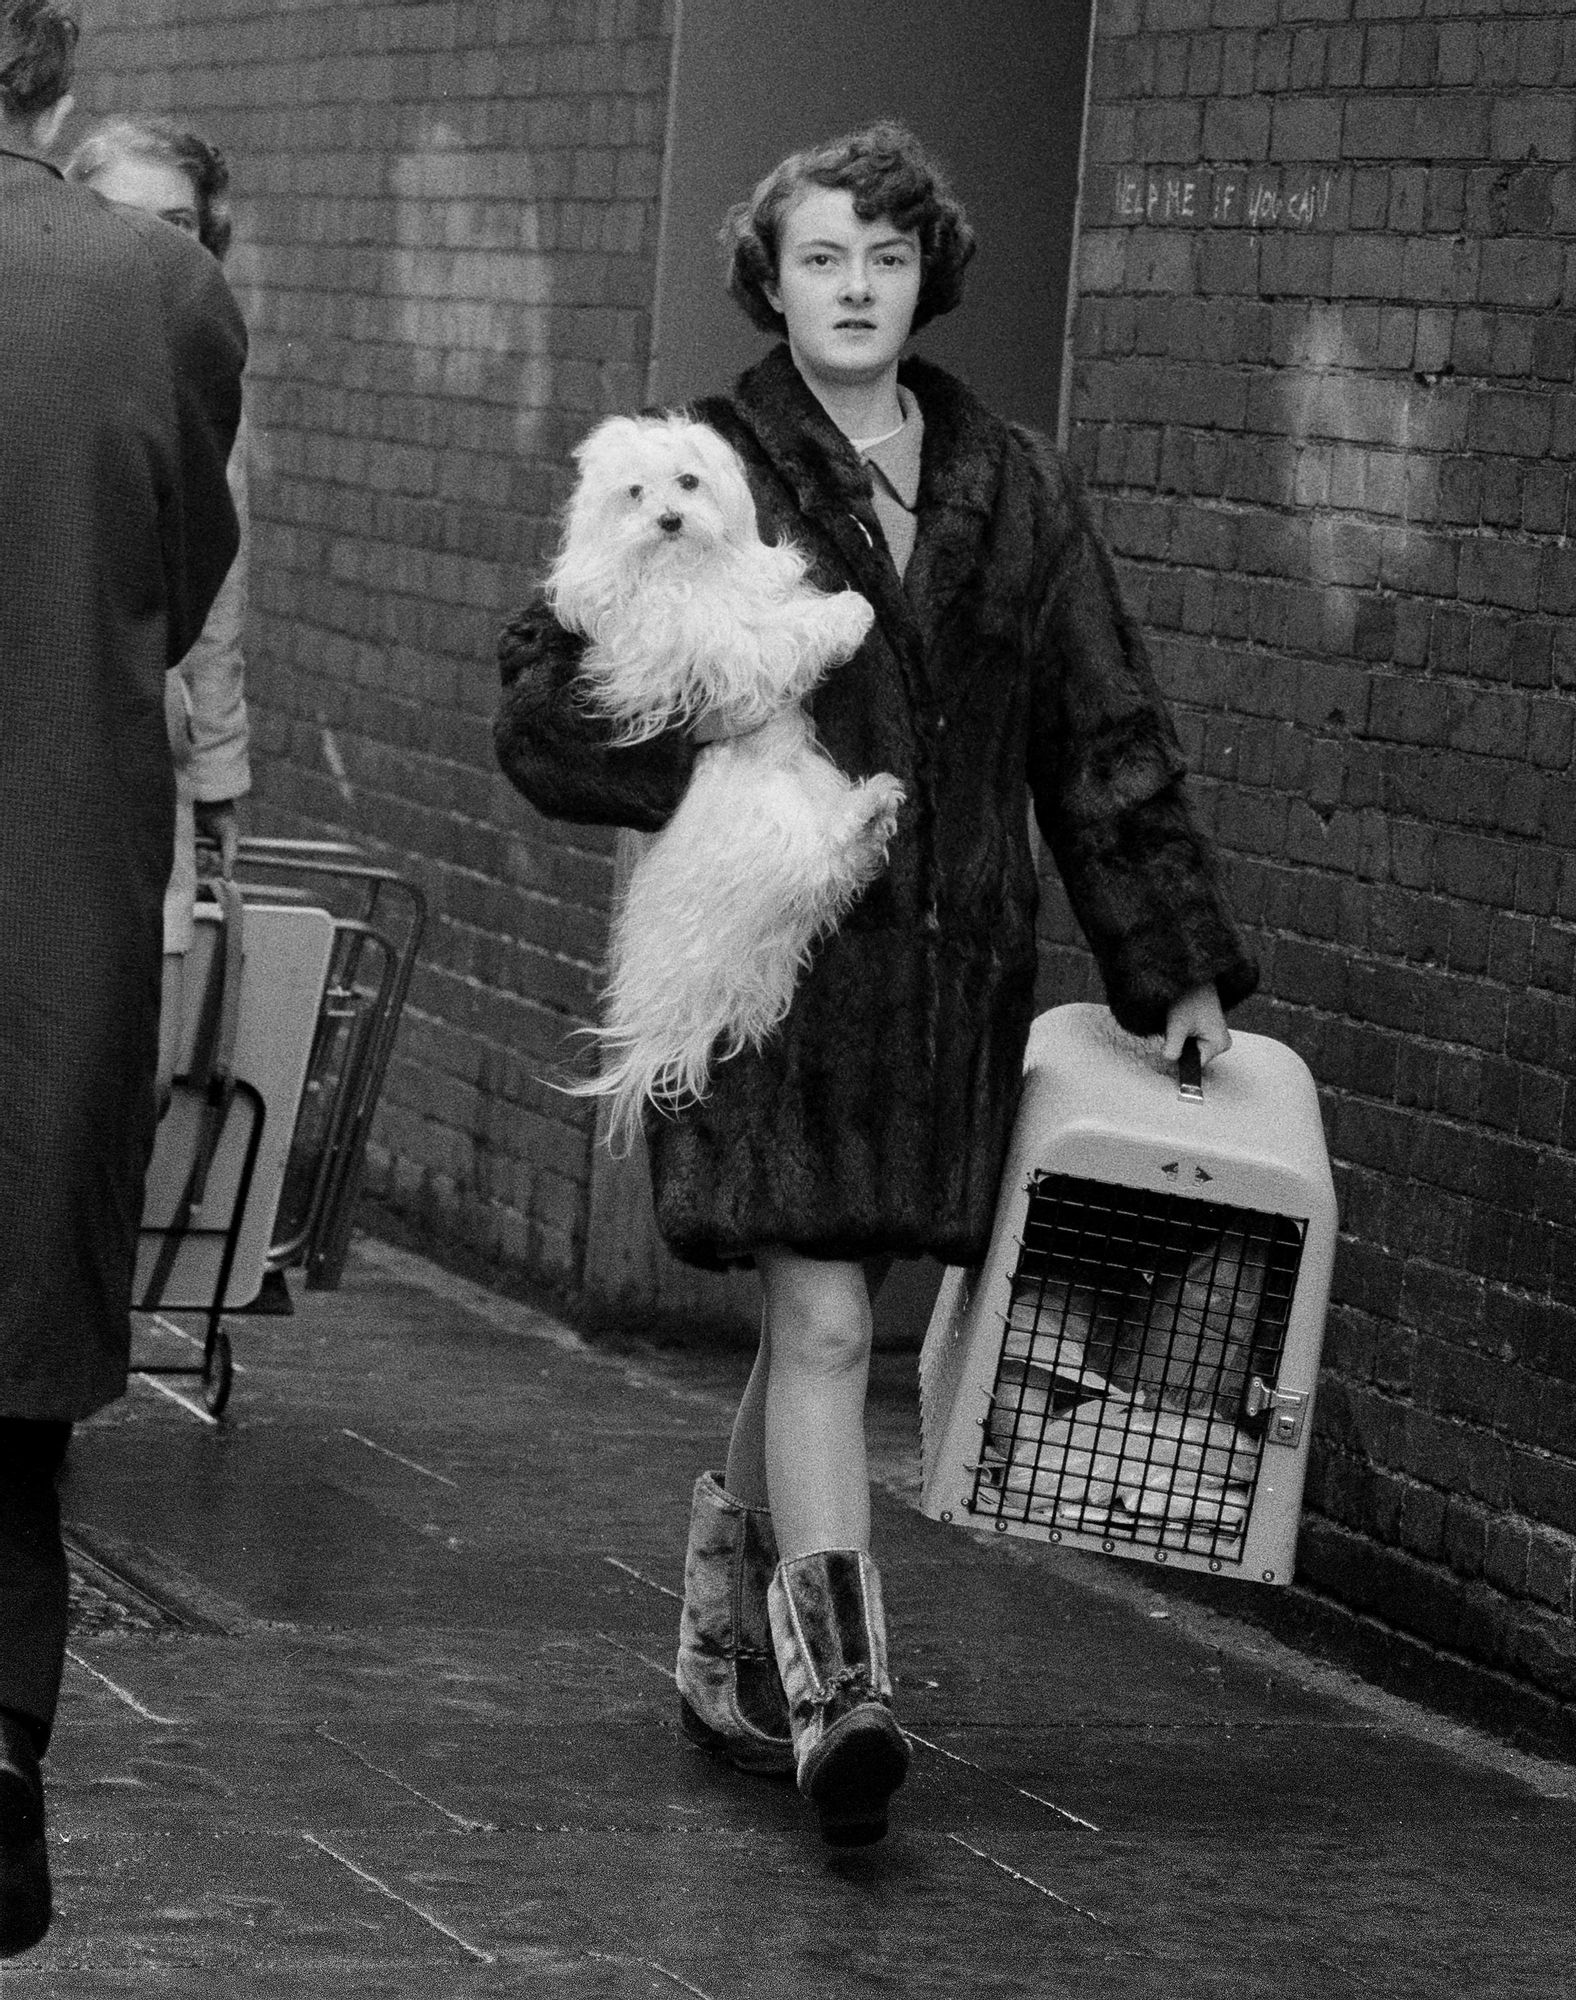 S_B&W_Dog_Show_Woman_Carrying_White_Dog+Cage_64